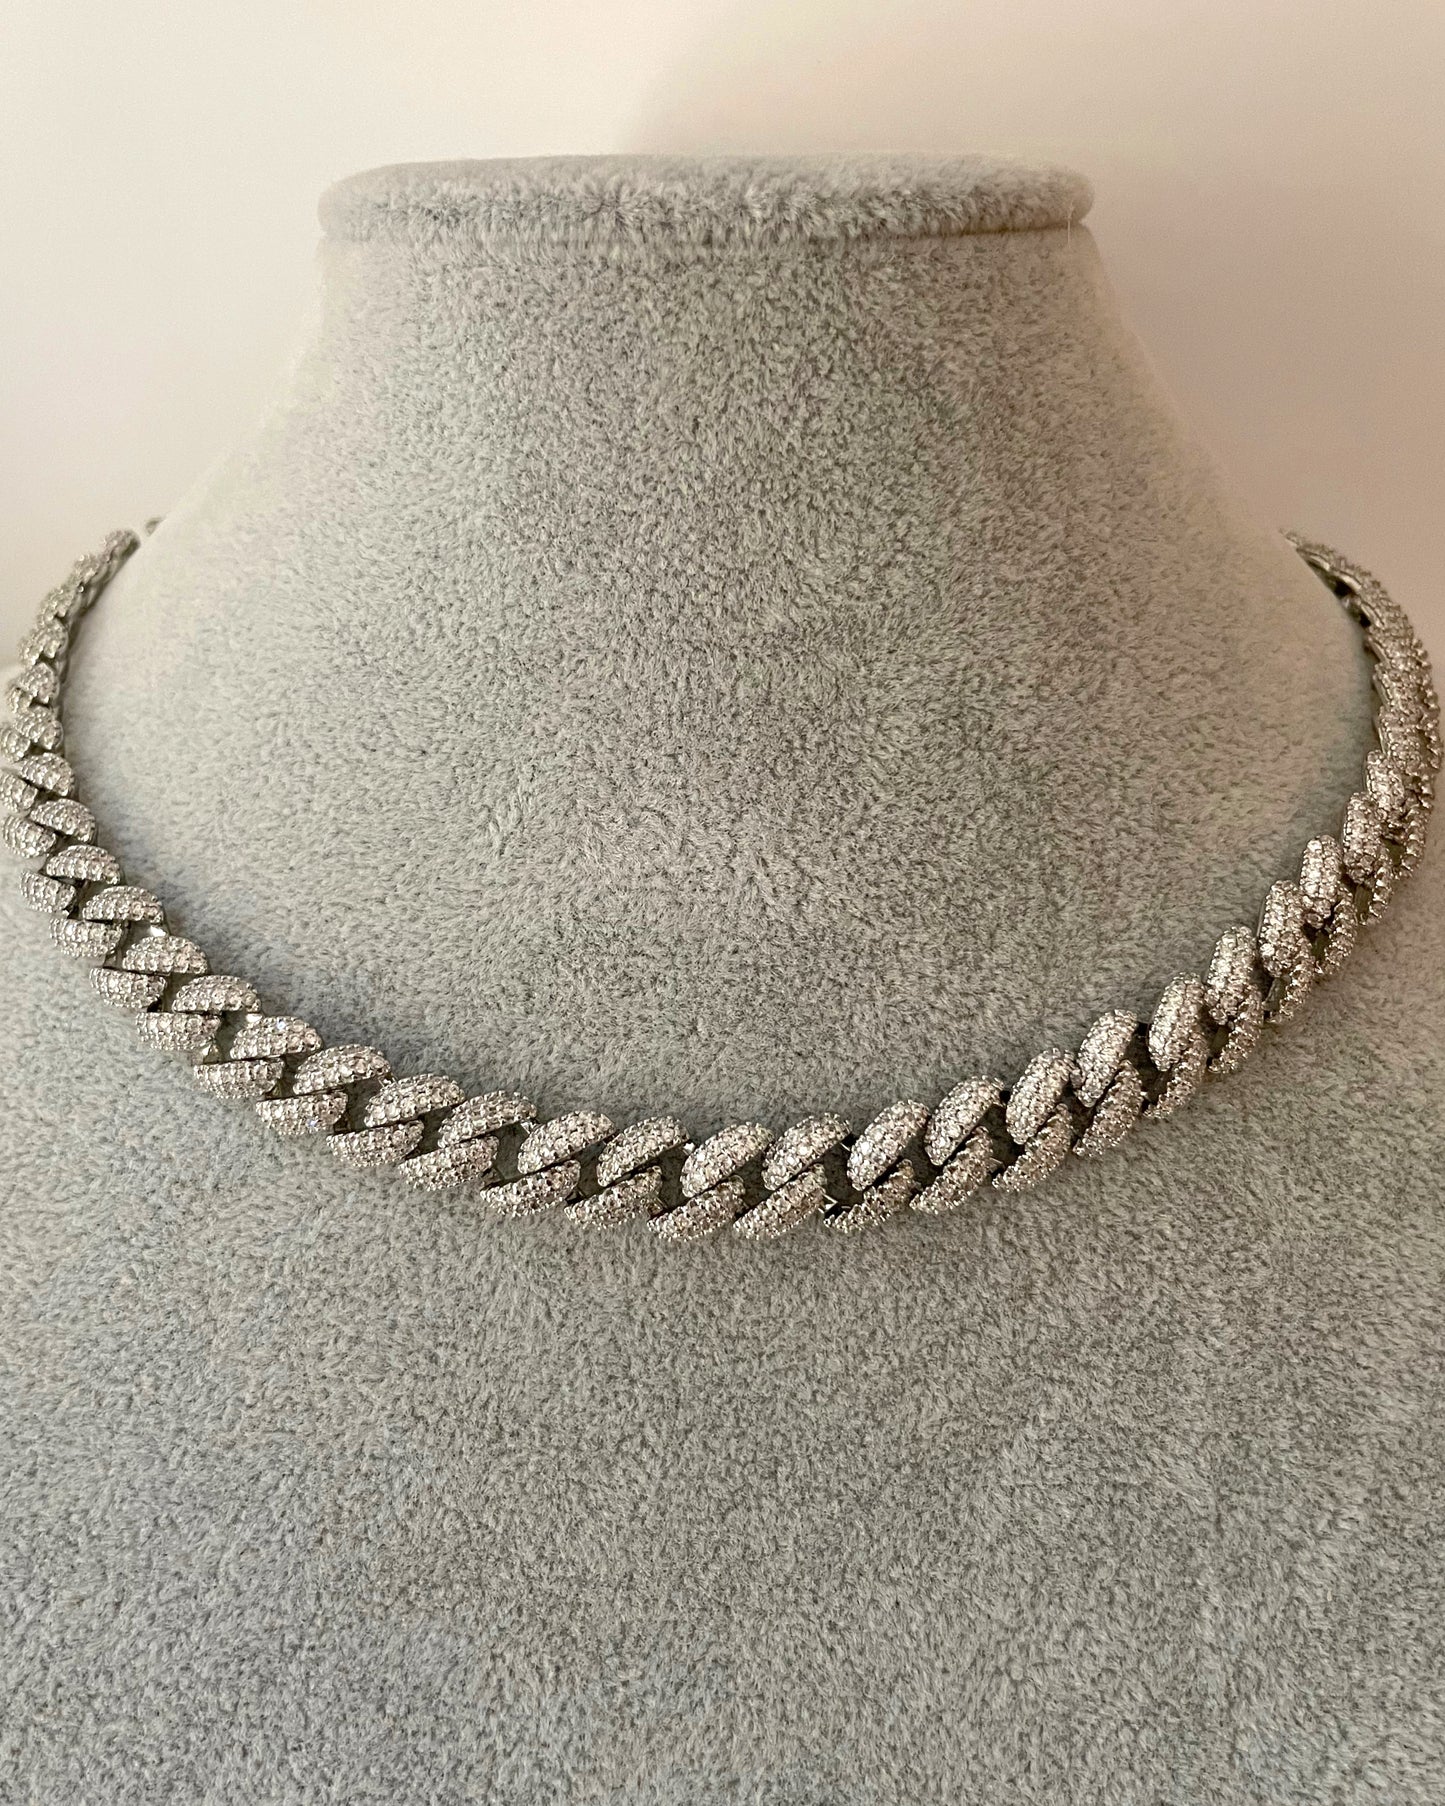 Iced Cuban link necklace